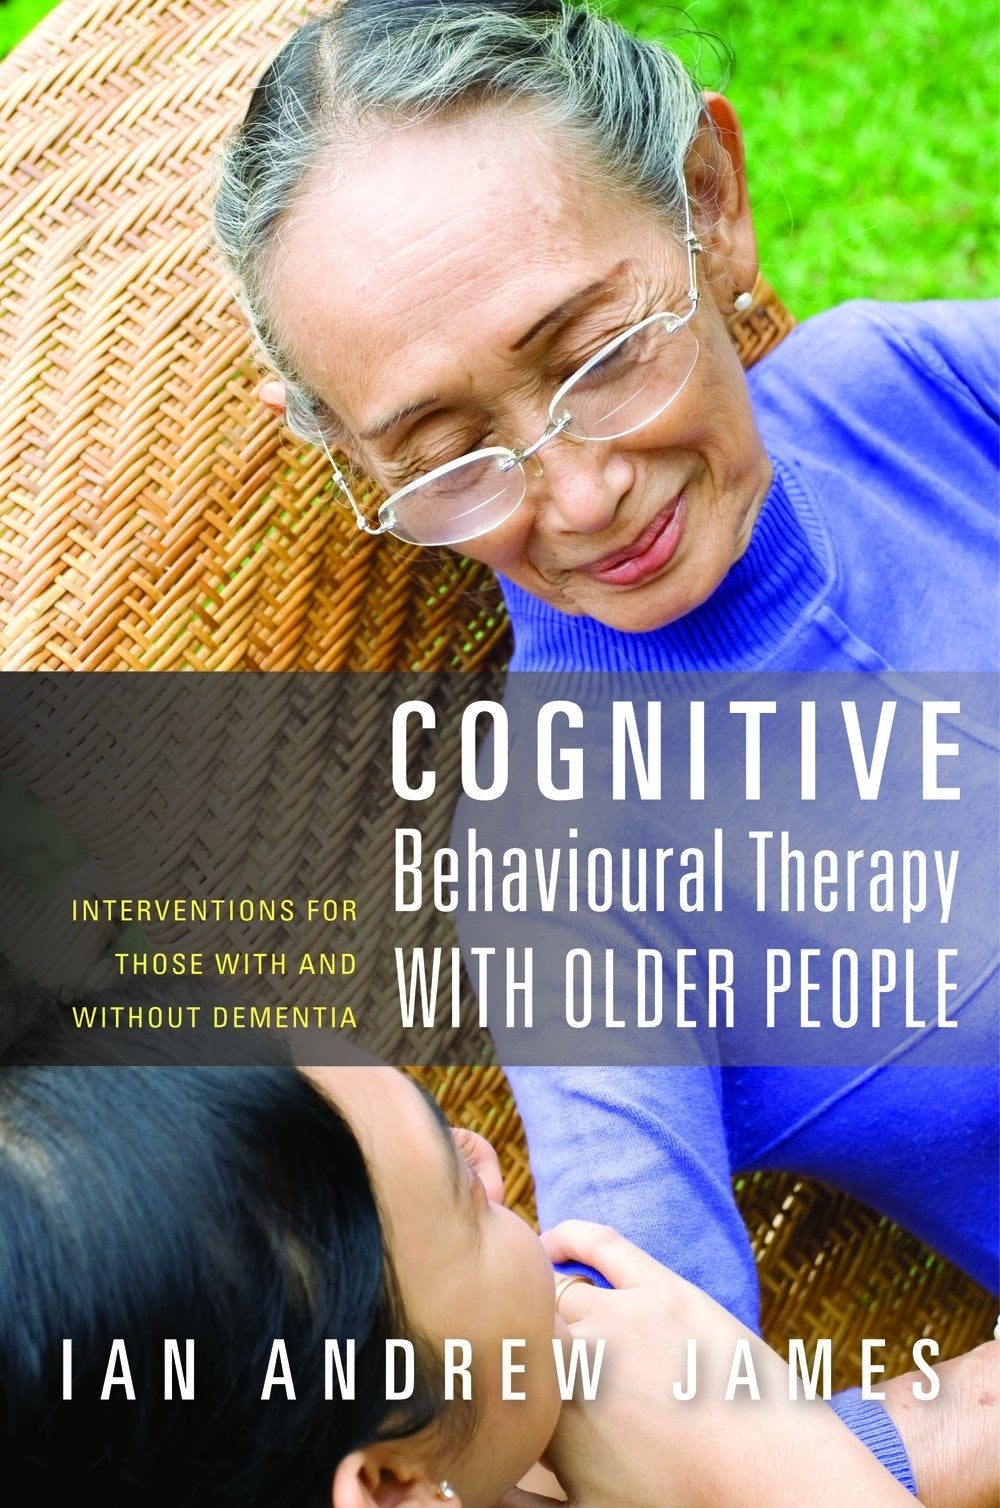 Cognitive Behavioural Therapy with Older People by Ian Andrew James